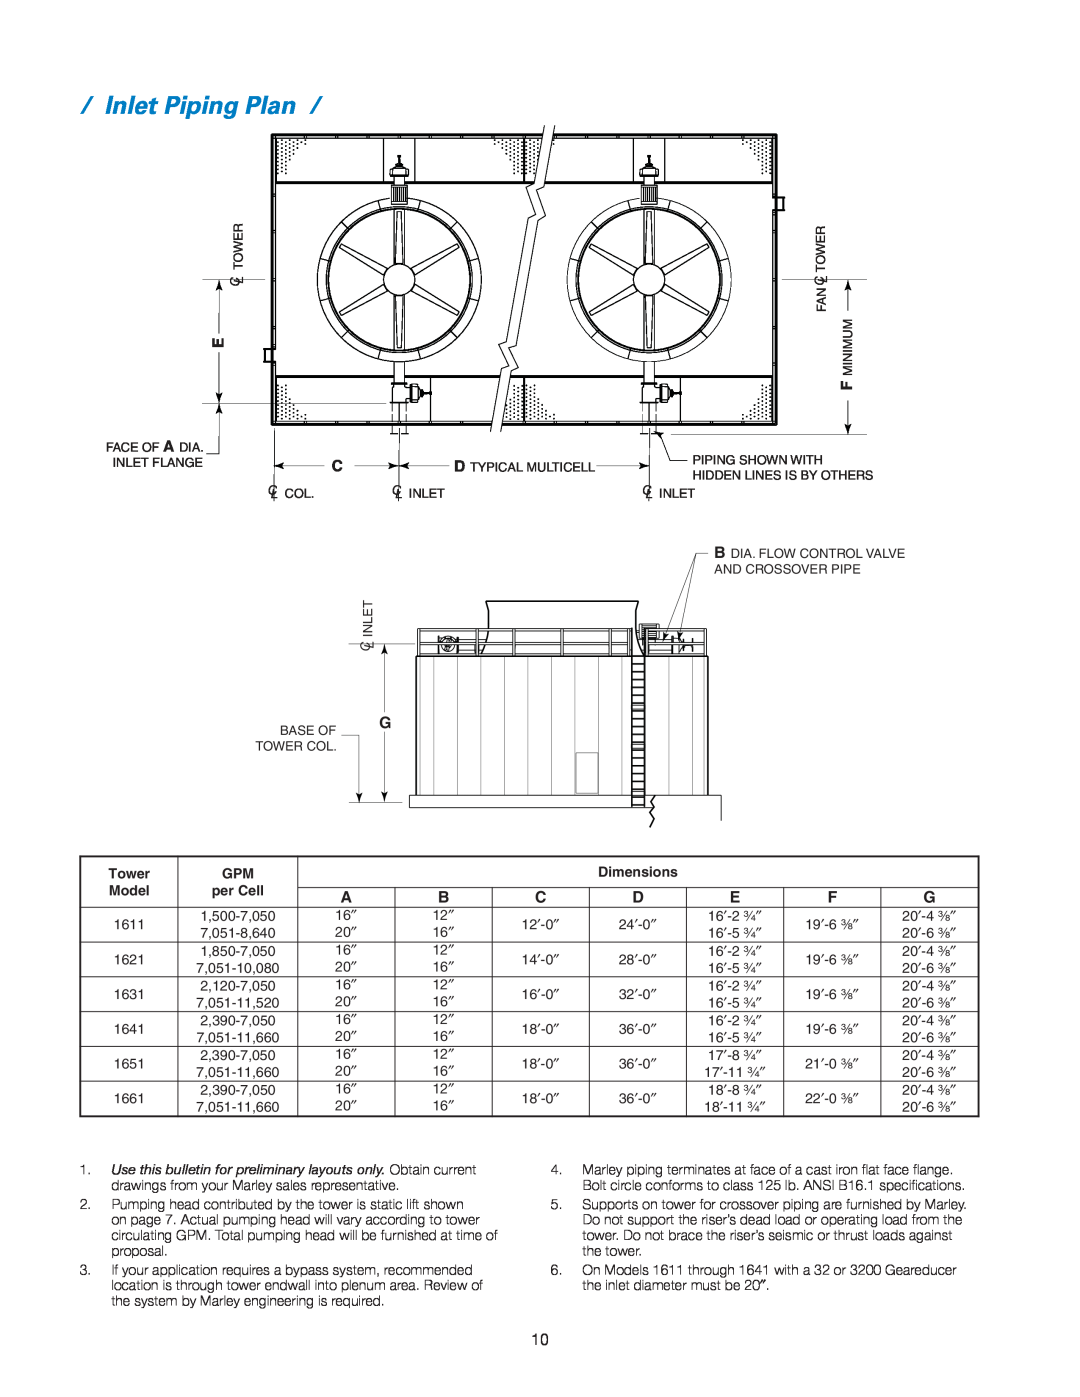 SPX Cooling Technologies 160 manual Inlet Piping Plan, 4OWER, $Imensions, Odel, Per #Ell 